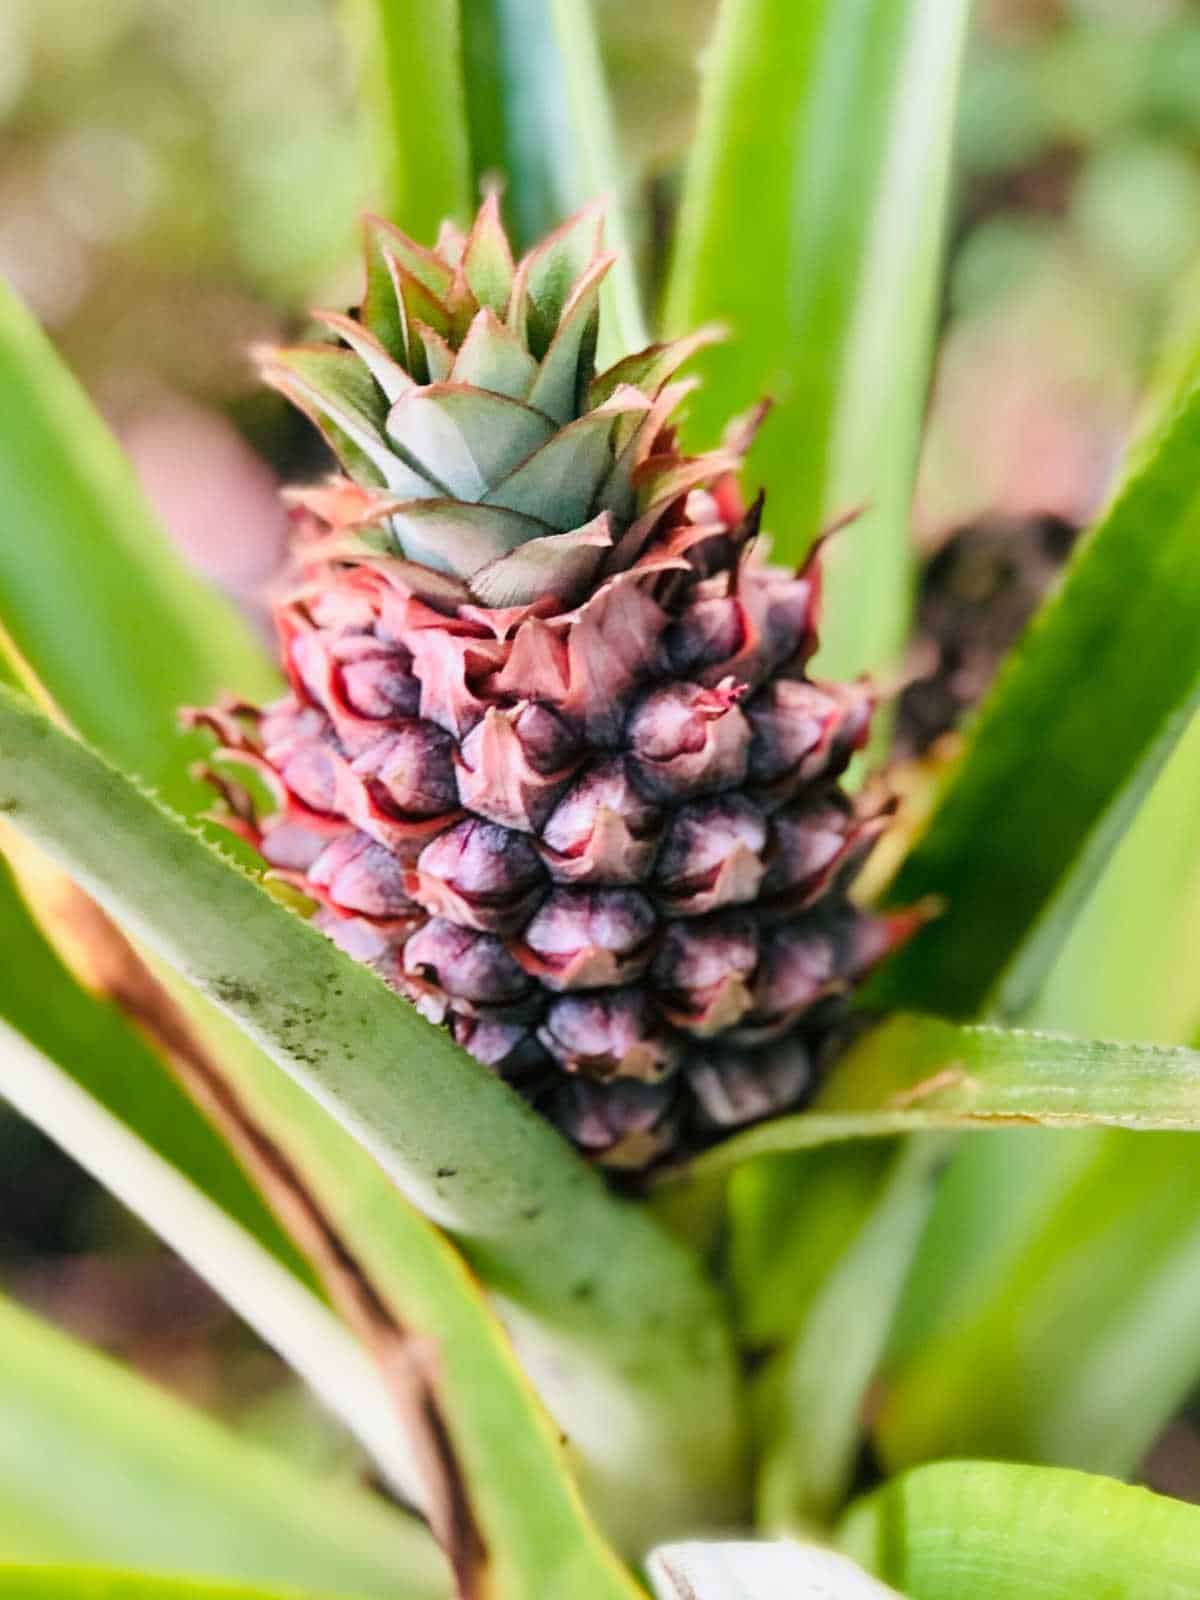 How to Grow and Care for Pineapple Plants Indoors